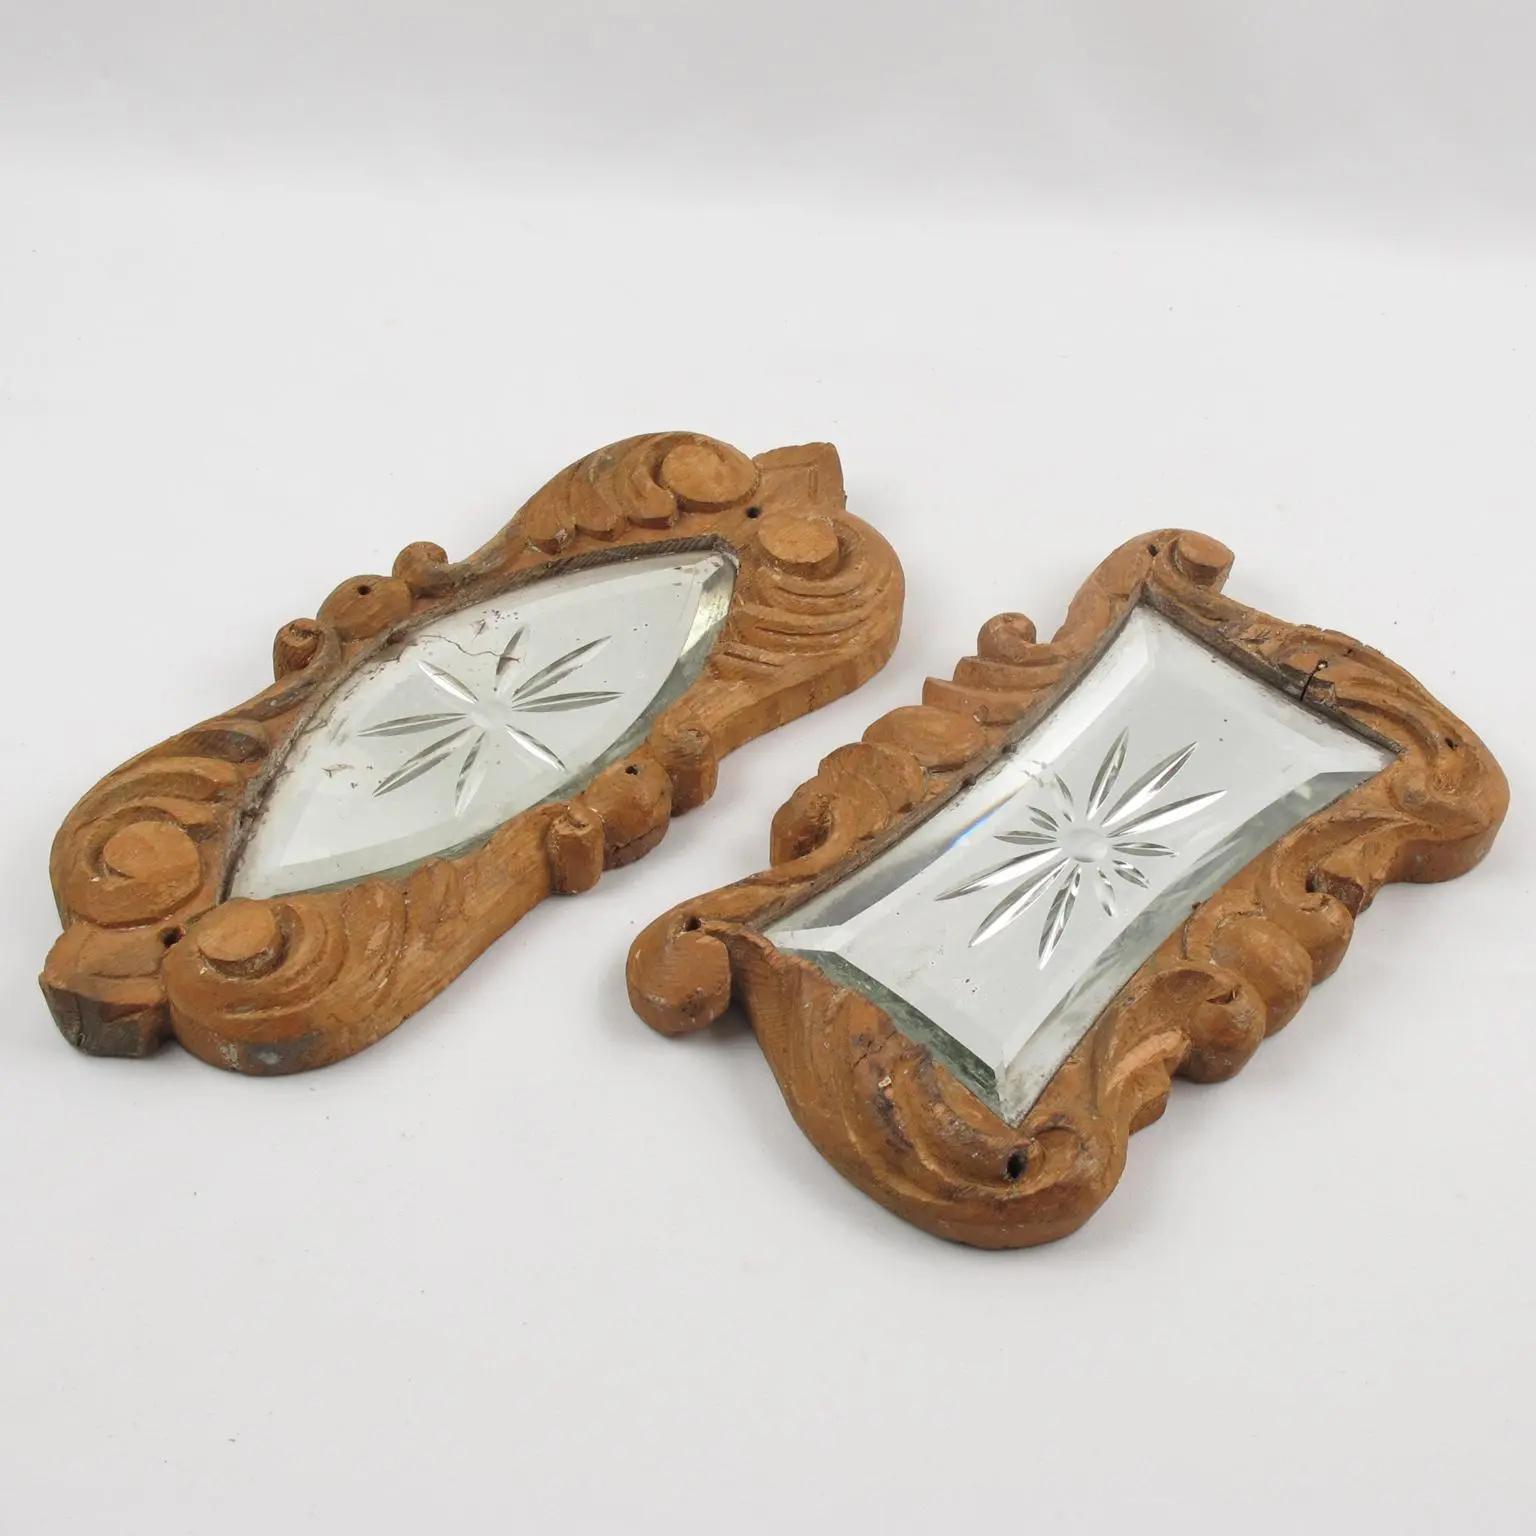 Carved Wood, Mirror Architectural Ornament Sculpture, 8 pc, Early 20th Century For Sale 1